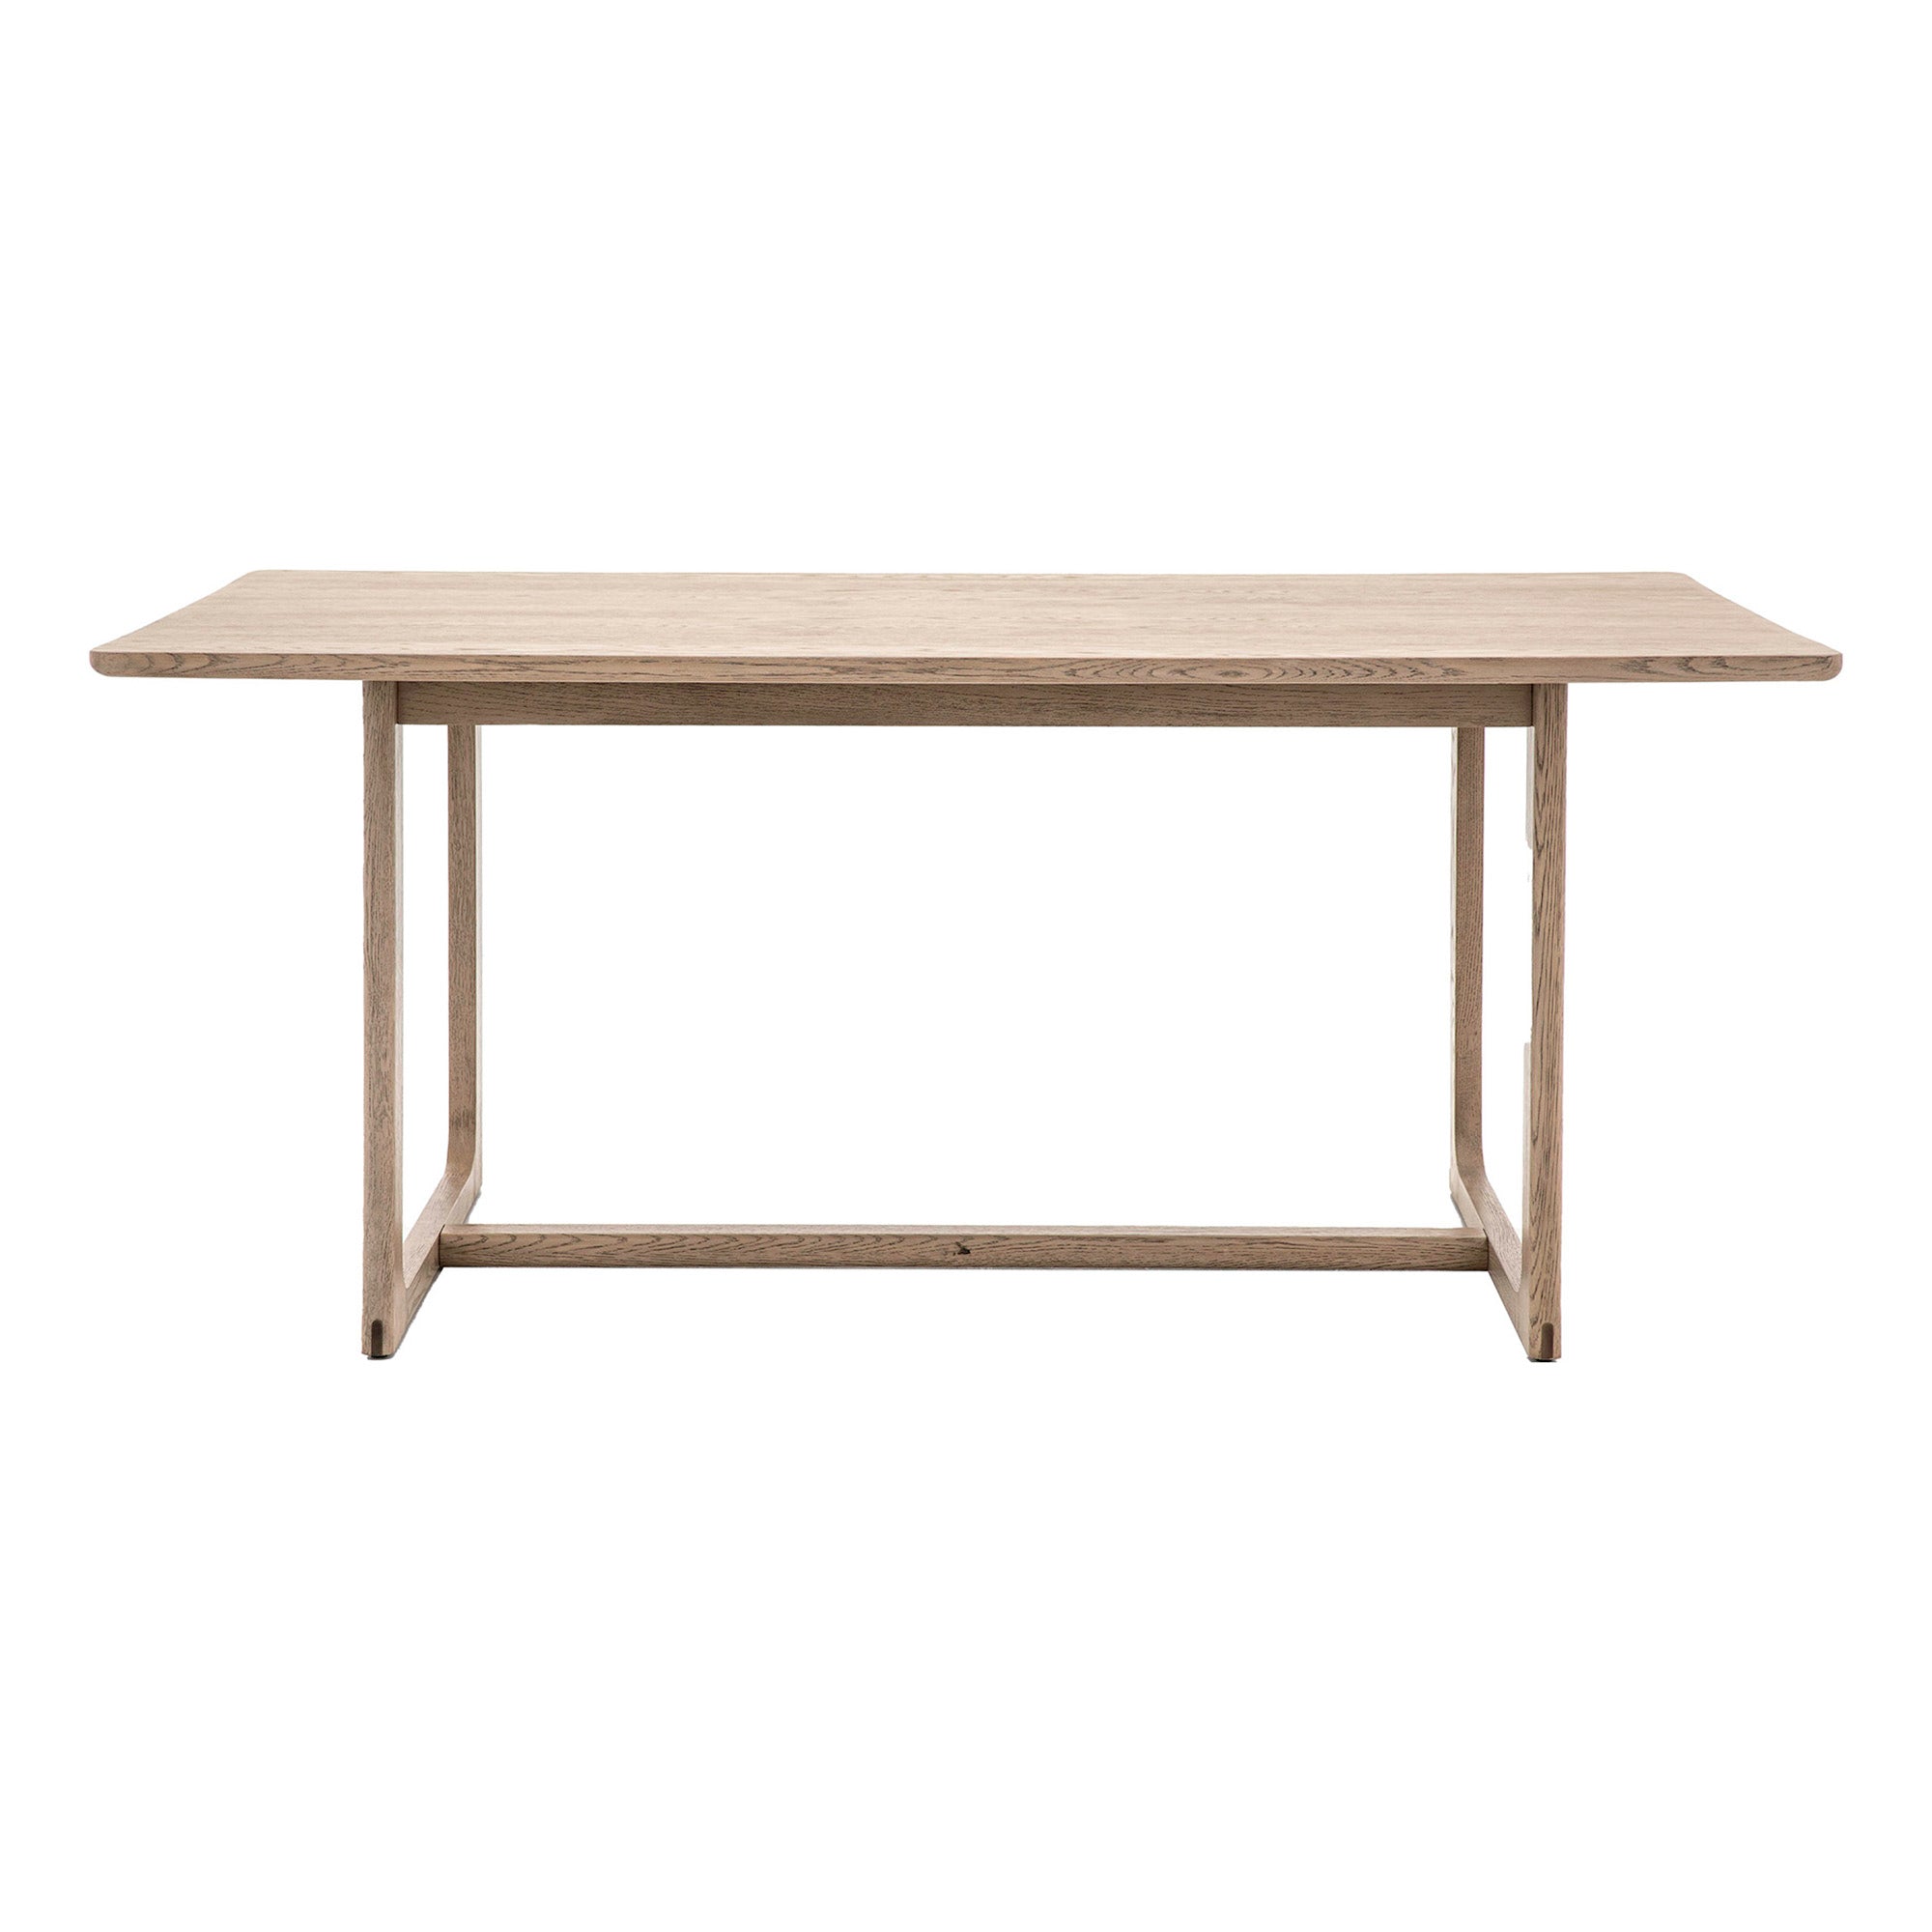 The Finest Wooden Dining Table